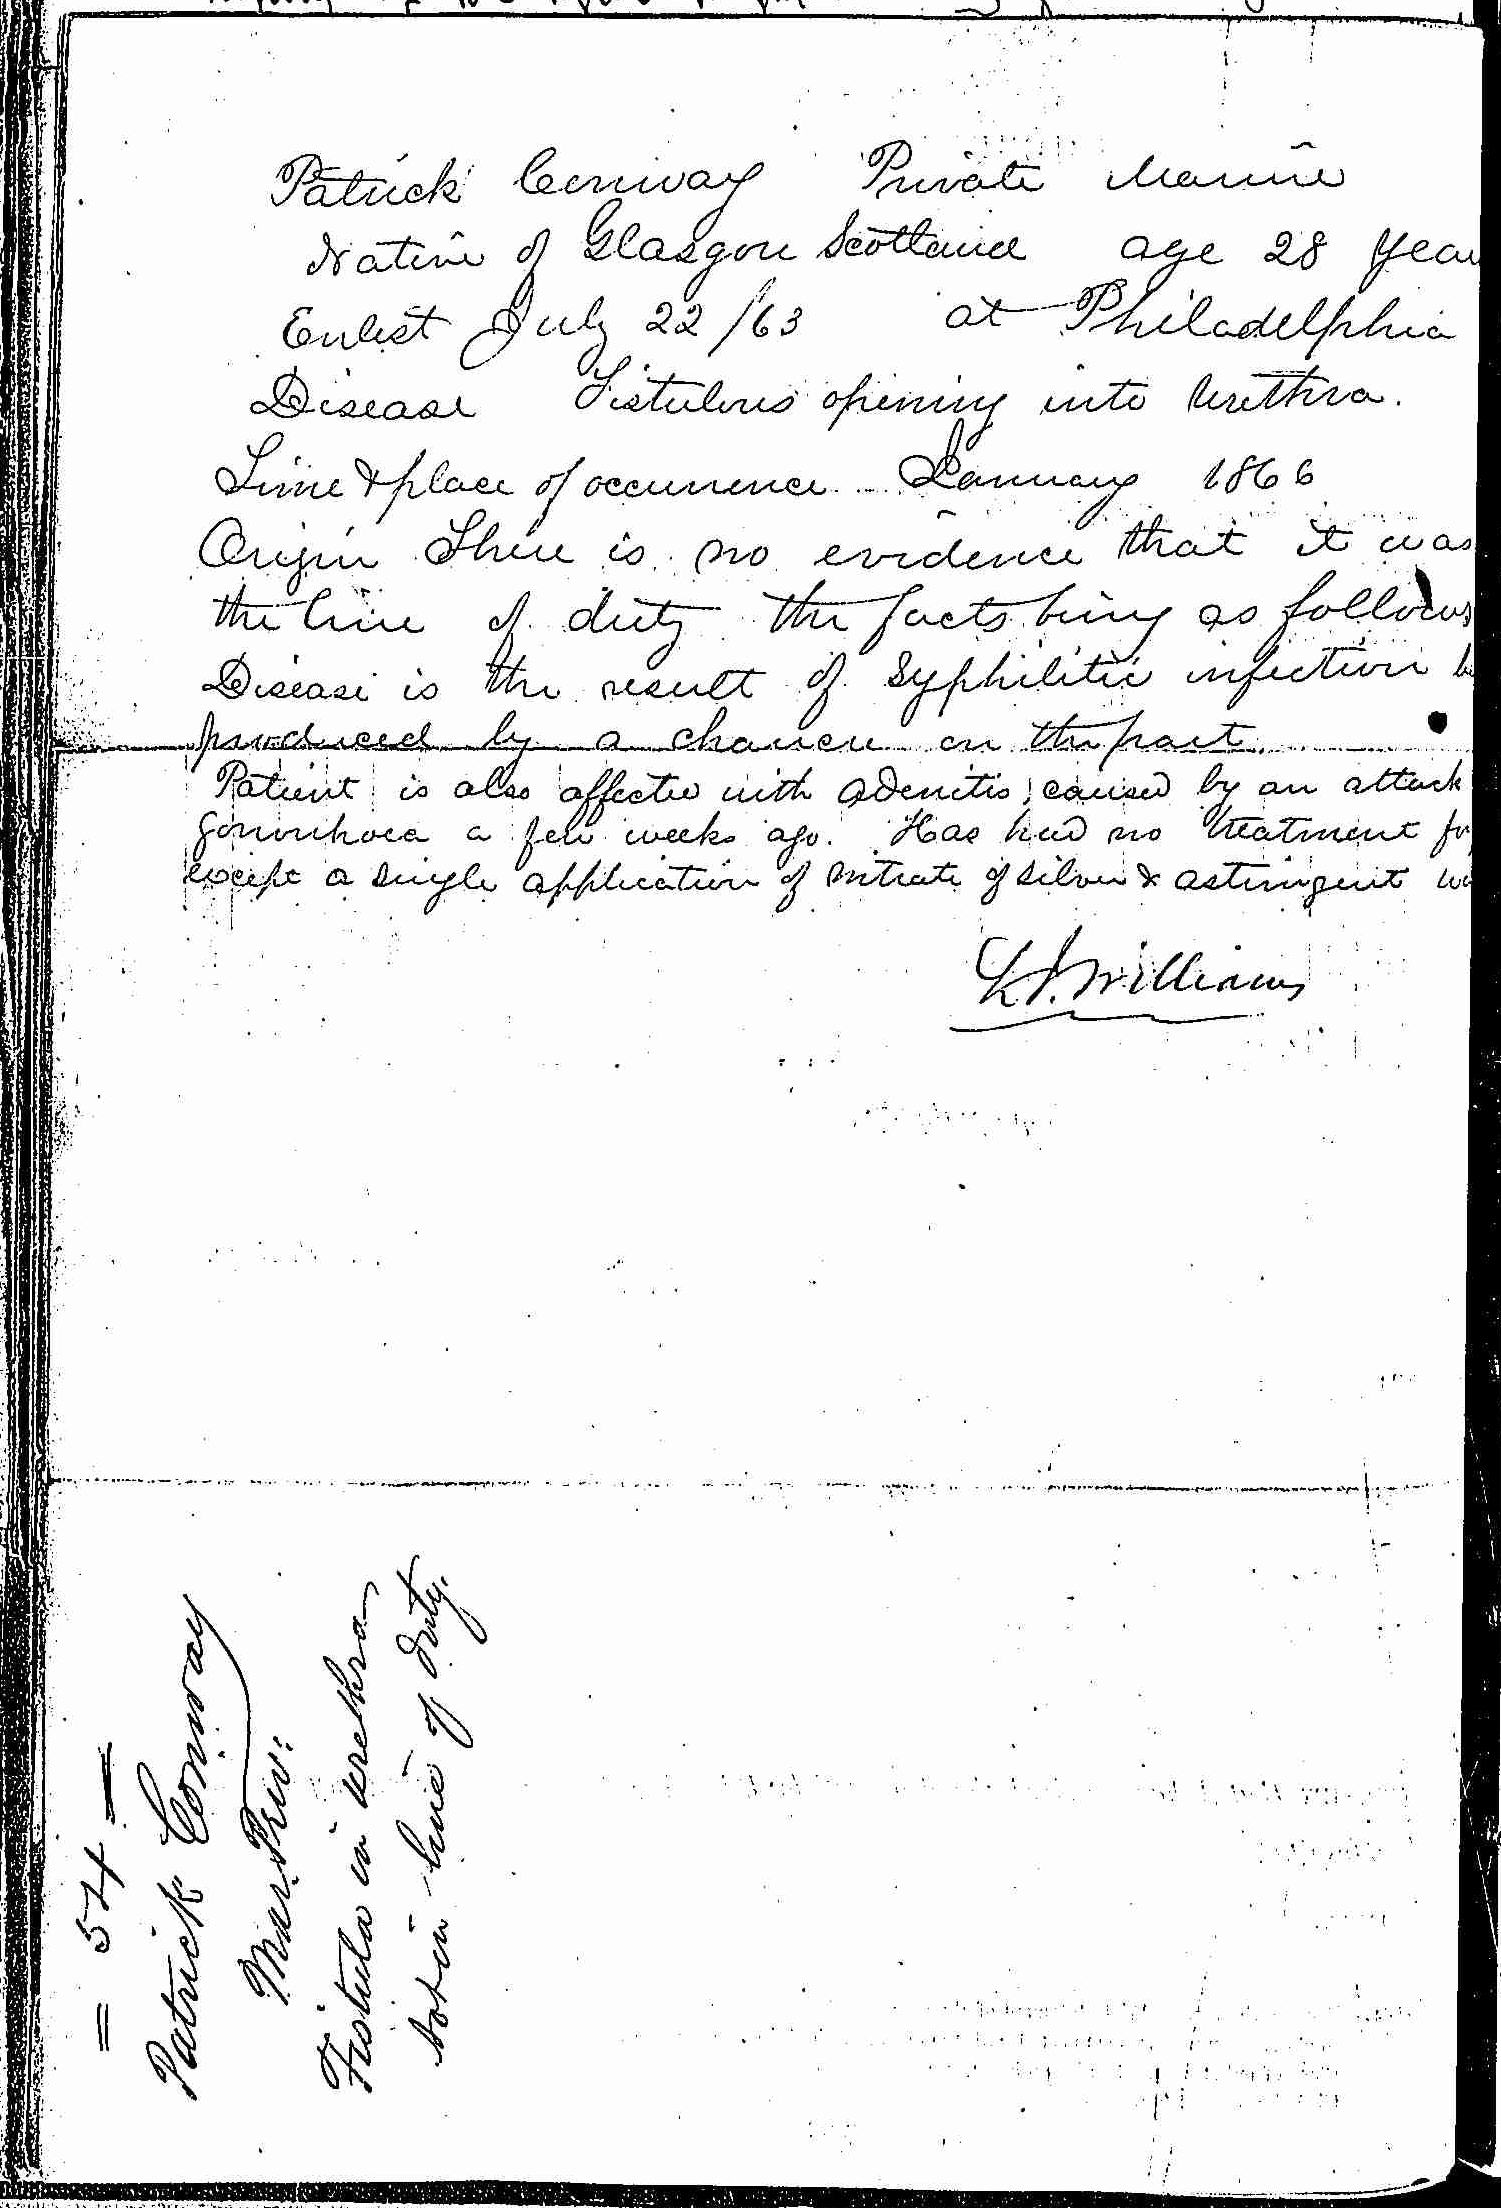 Entry for Patrick Conway (page 2 of 2) in the log Hospital Tickets and Case Papers - Naval Hospital - Washington, D.C. - 1865-68